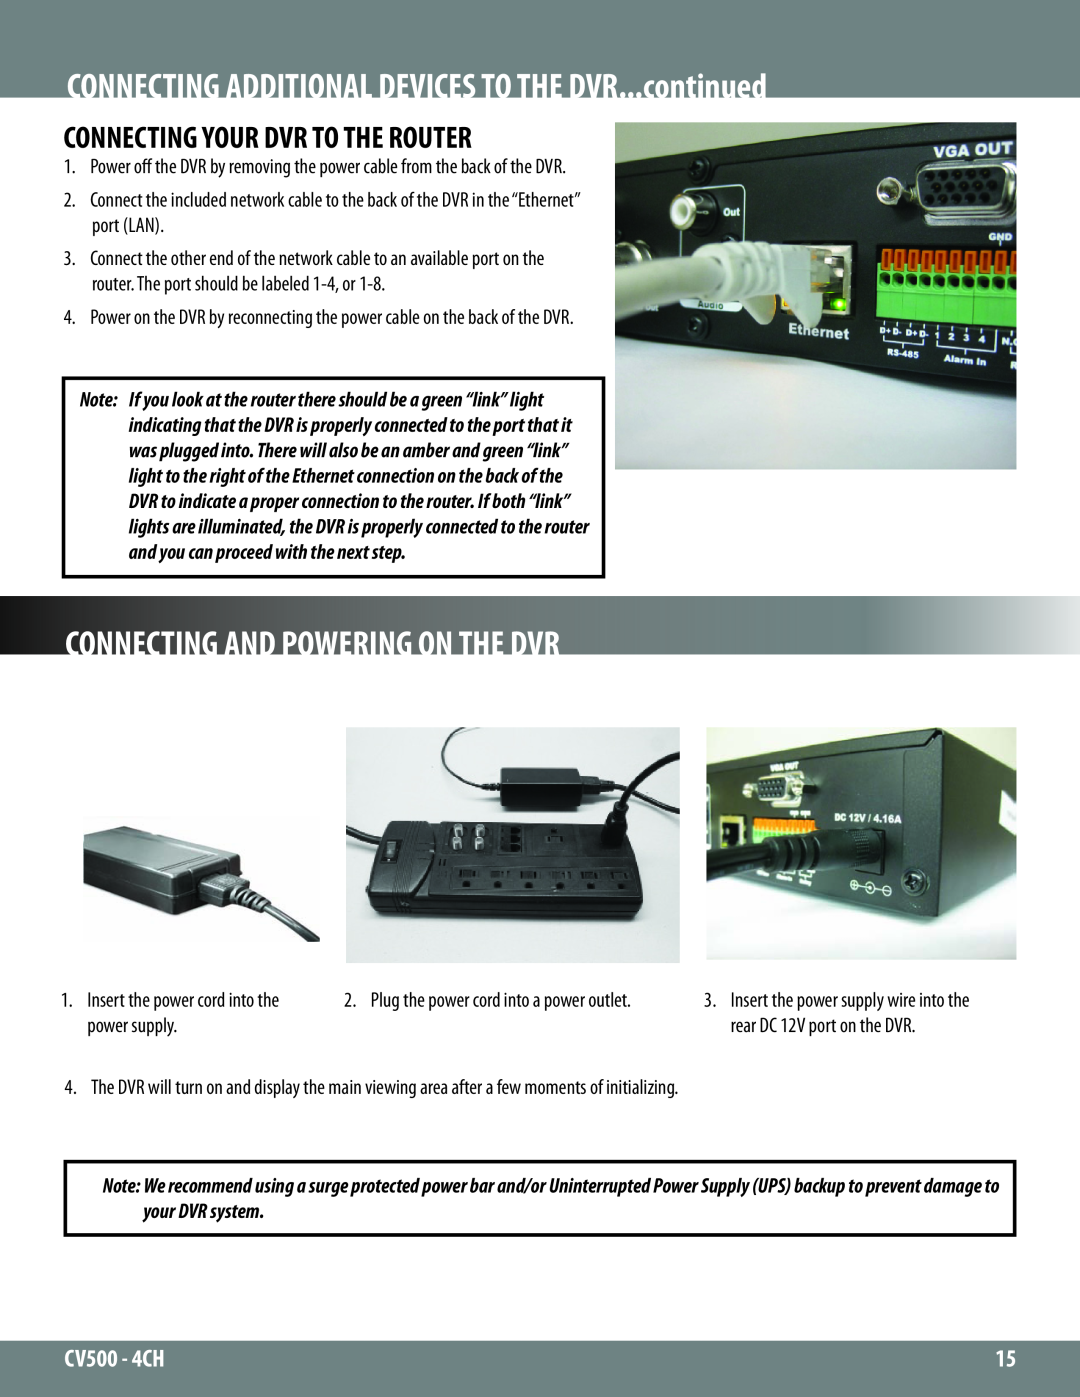 SVAT Electronics 2CV500 - 4CH instruction manual Connecting And Powering On The Dvr, Connecting Your Dvr To The Router 